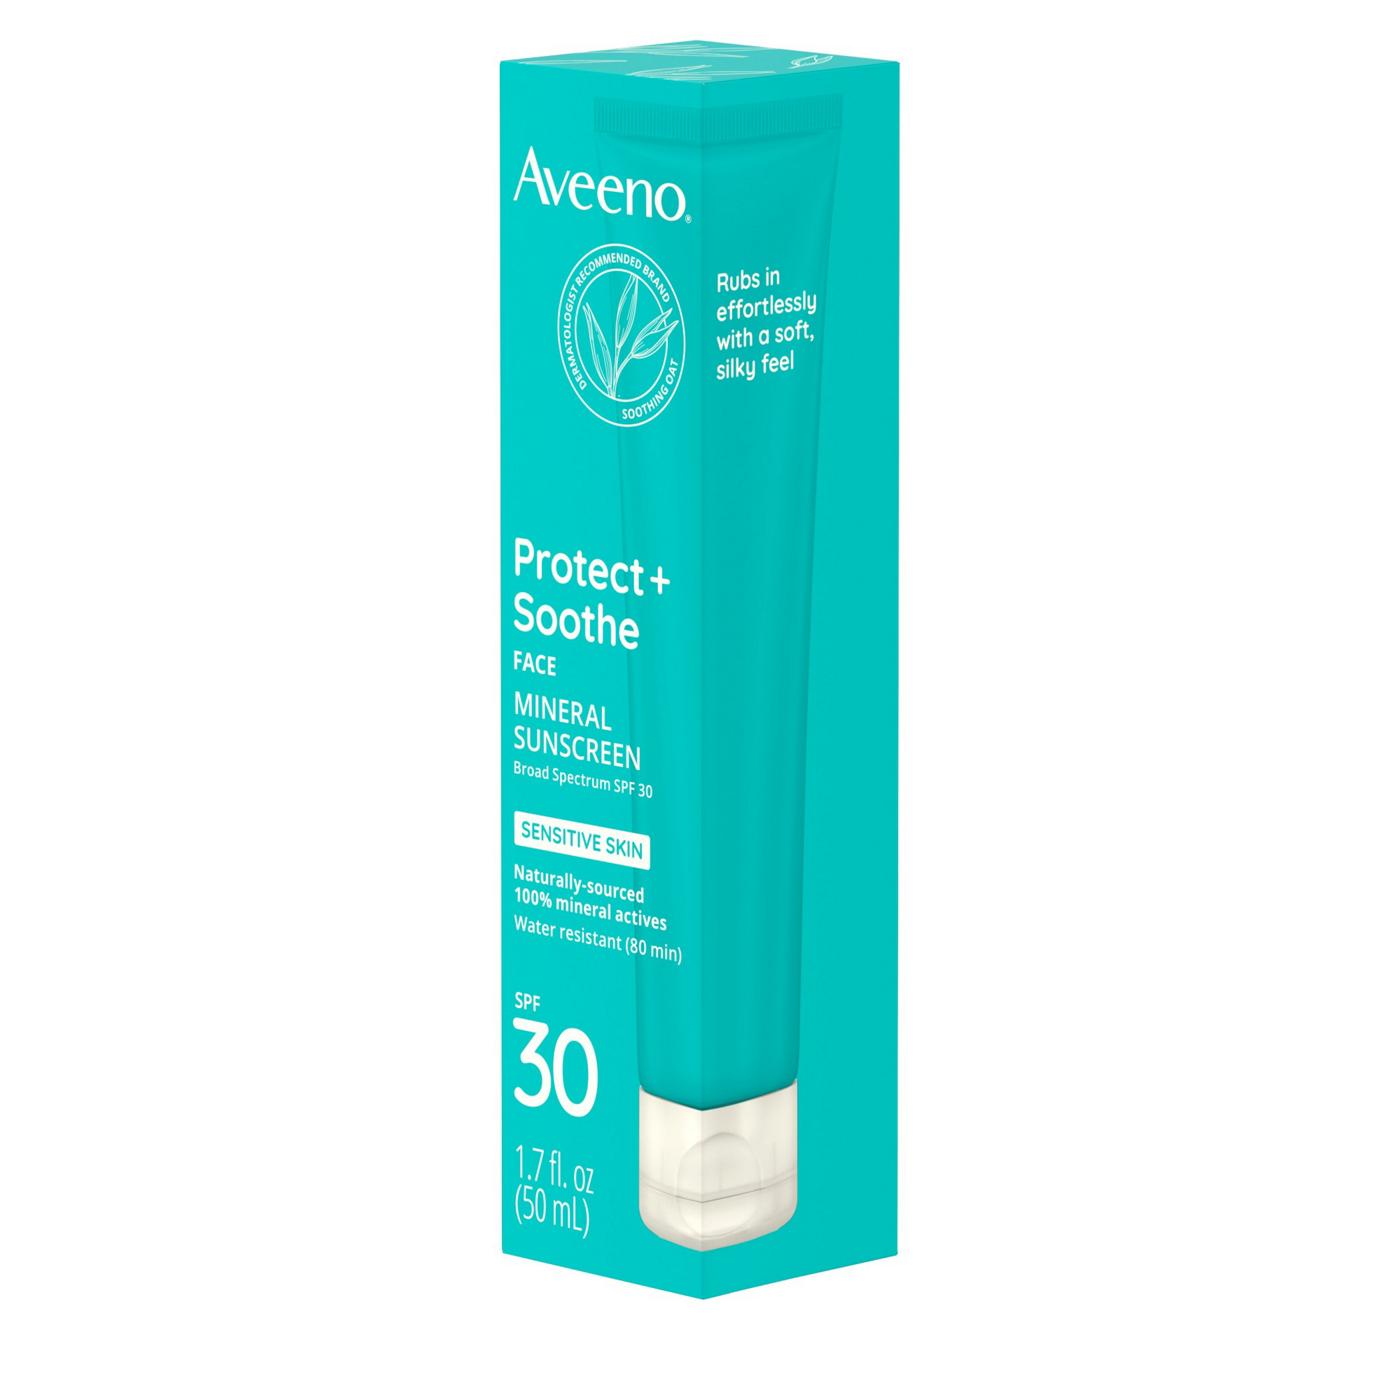 Aveeno Protect + Soothe Face Mineral Sunscreen SPF 30; image 7 of 9